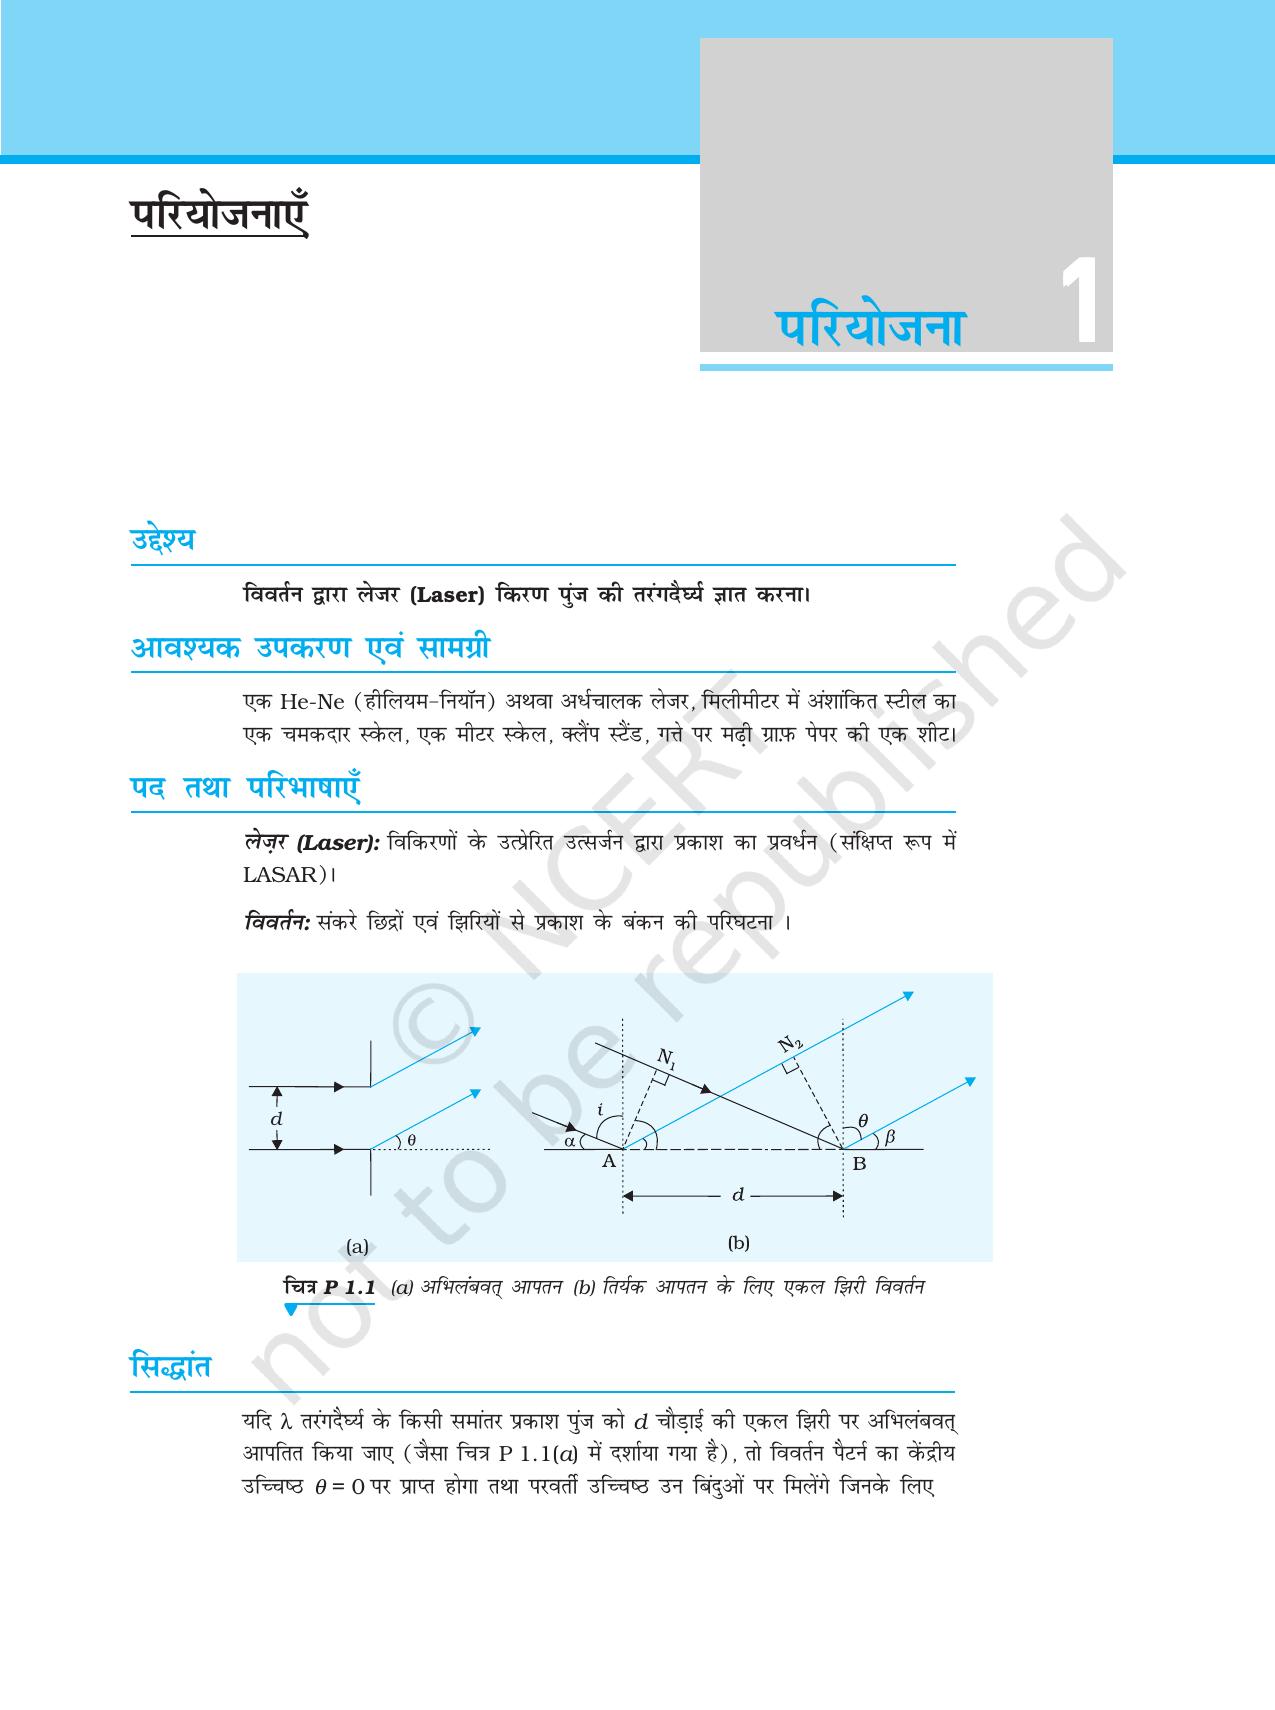 NCERT Laboratory Manuals for Class XII भौतिकी - परियोजना (1 - 7) - Page 1